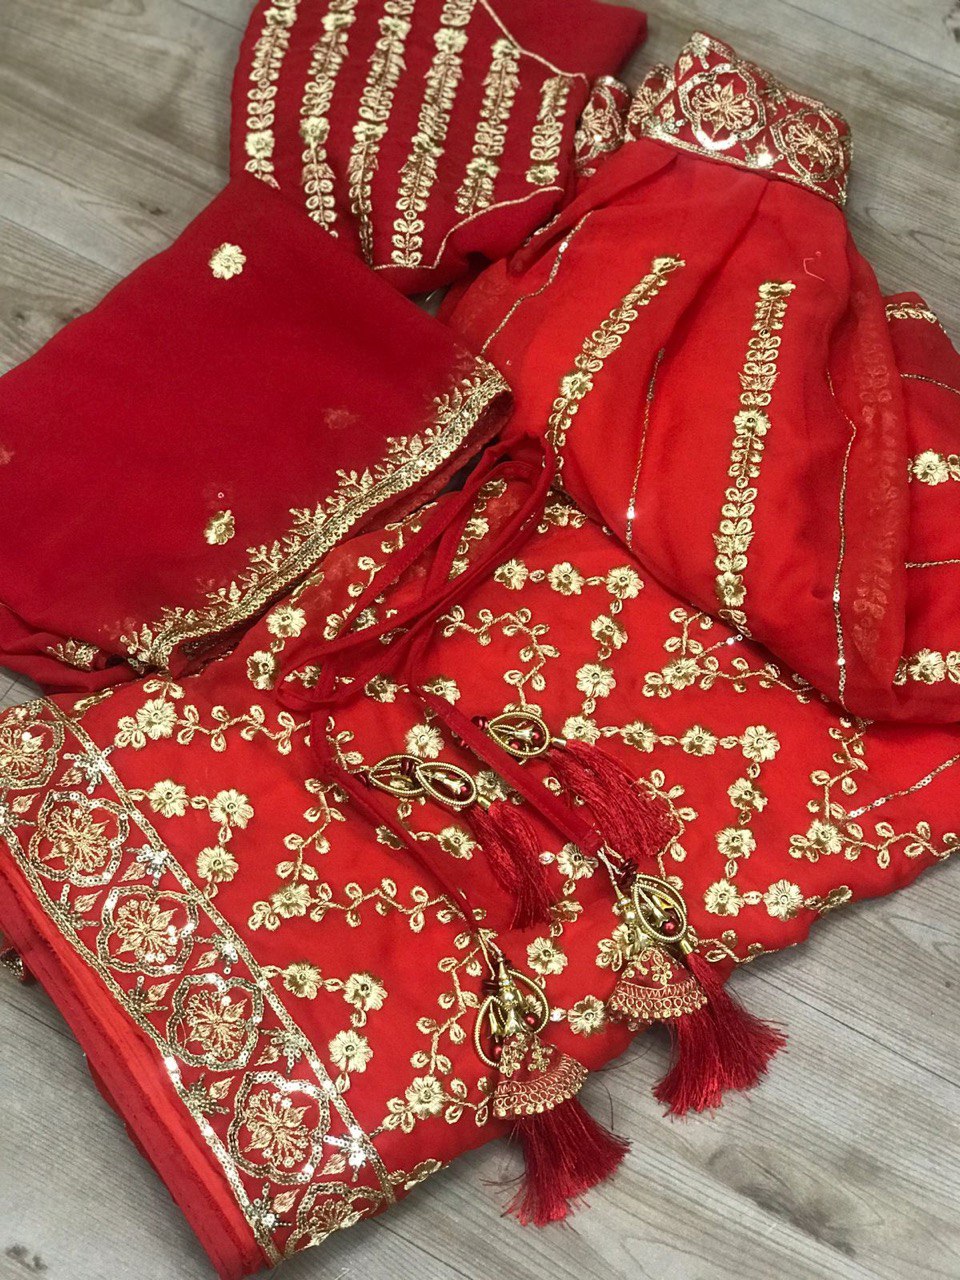 Red Lehenga Choli In Georgette Silk With Embroidery Work